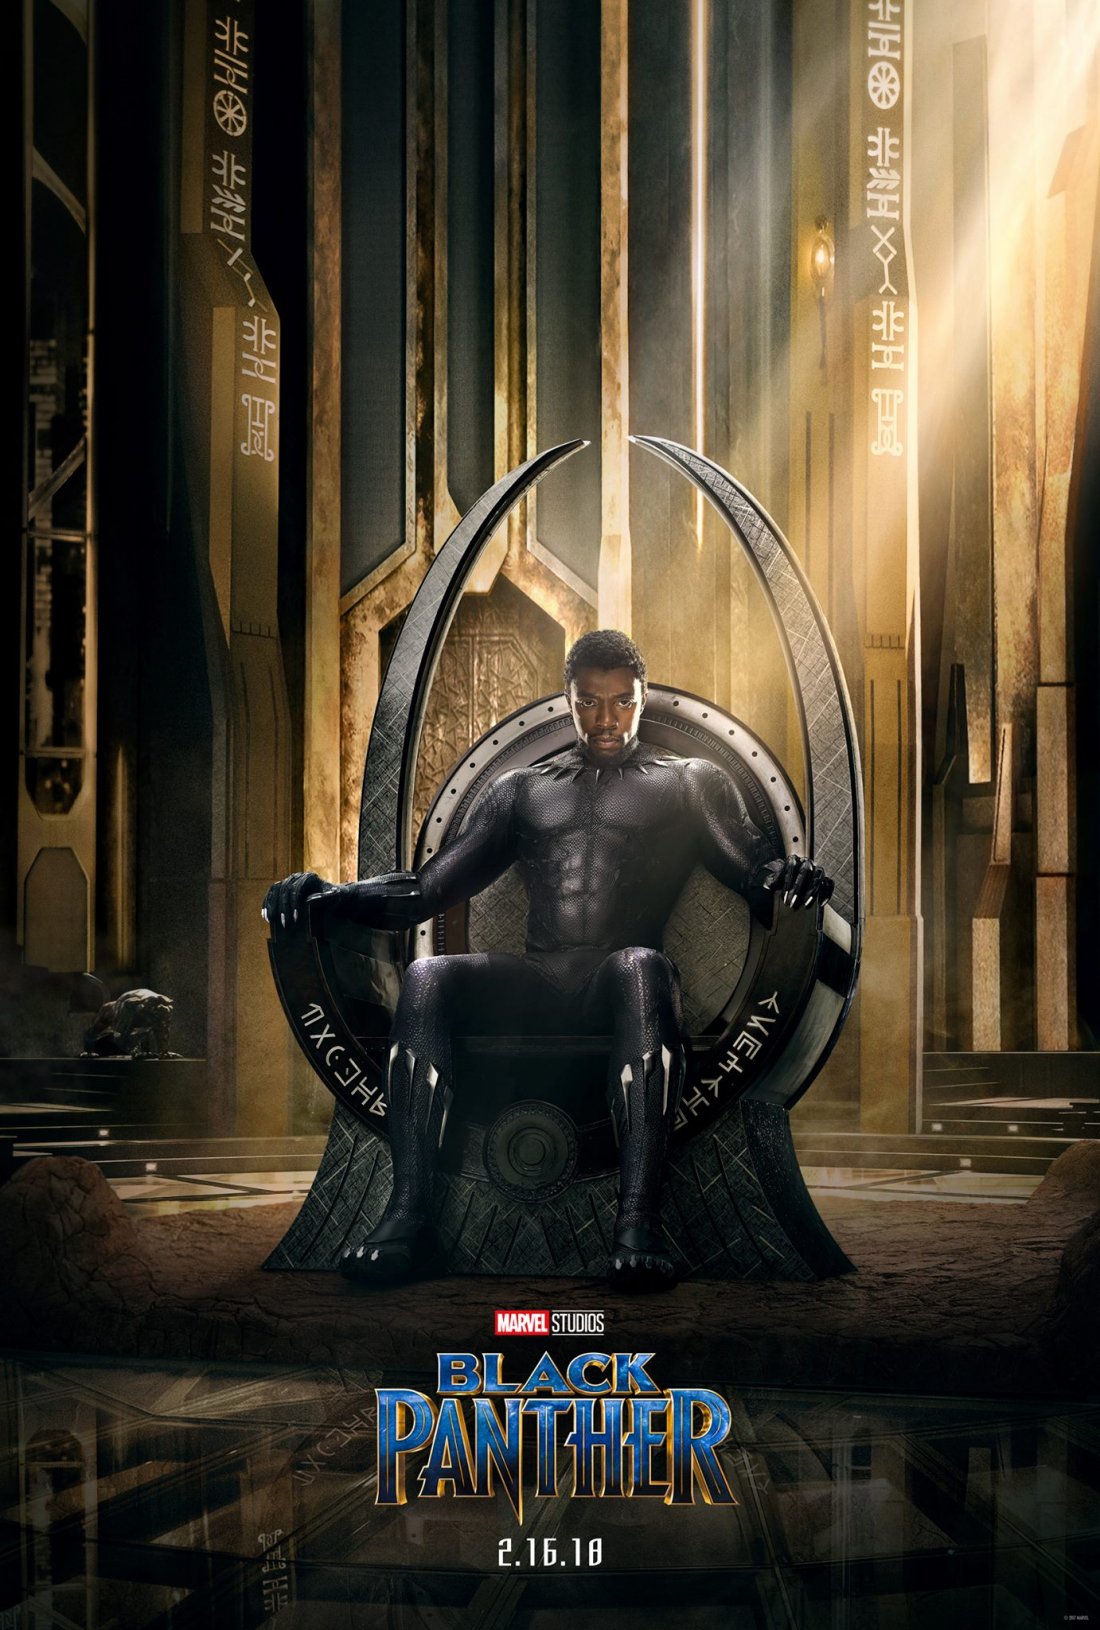 Blackpanther Poster